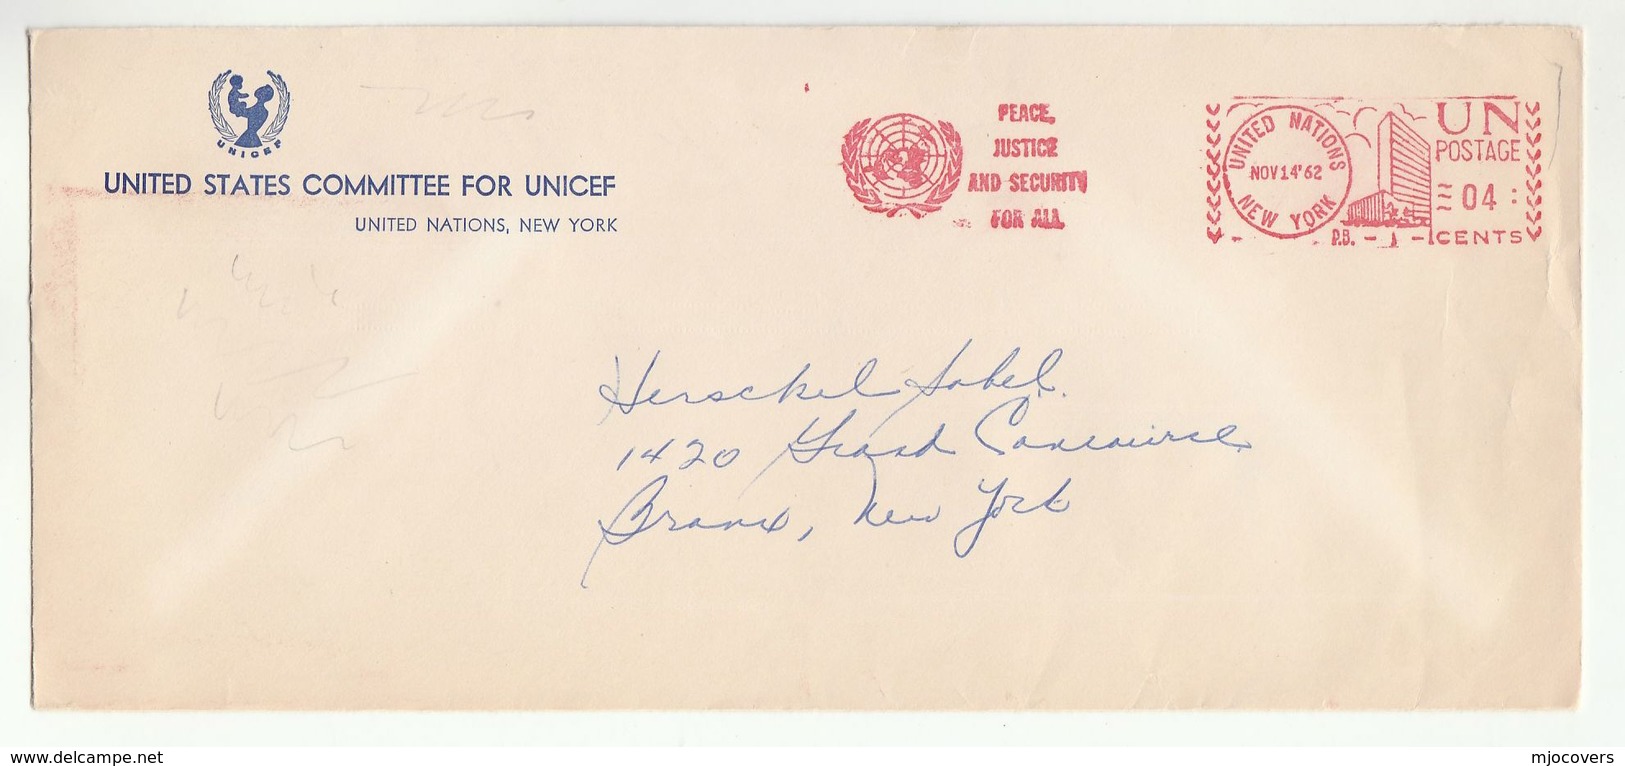 1962 'UNITED STATES COMMITTEE FOR UNICEF' COVER Illus METER SLOGAN  PEACE JUSTICE SECURITY FOR ALL  United Nations Un - Covers & Documents